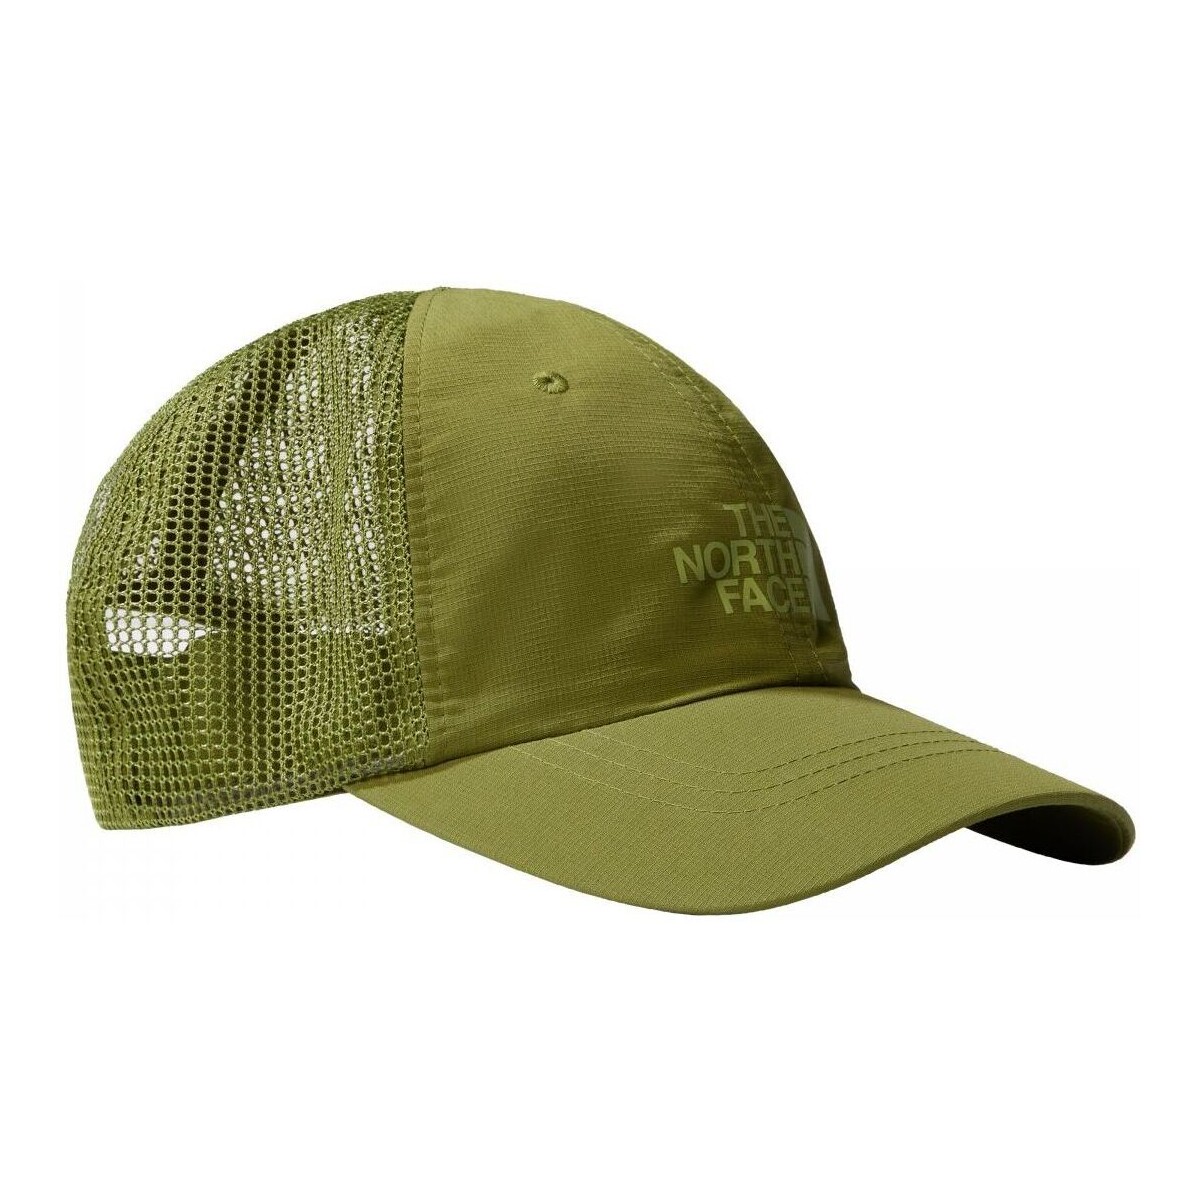 Accessoires textile Chapeaux The North Face NF0A5FXSPIB1 TRUCKER-FOREST OLIVE Vert